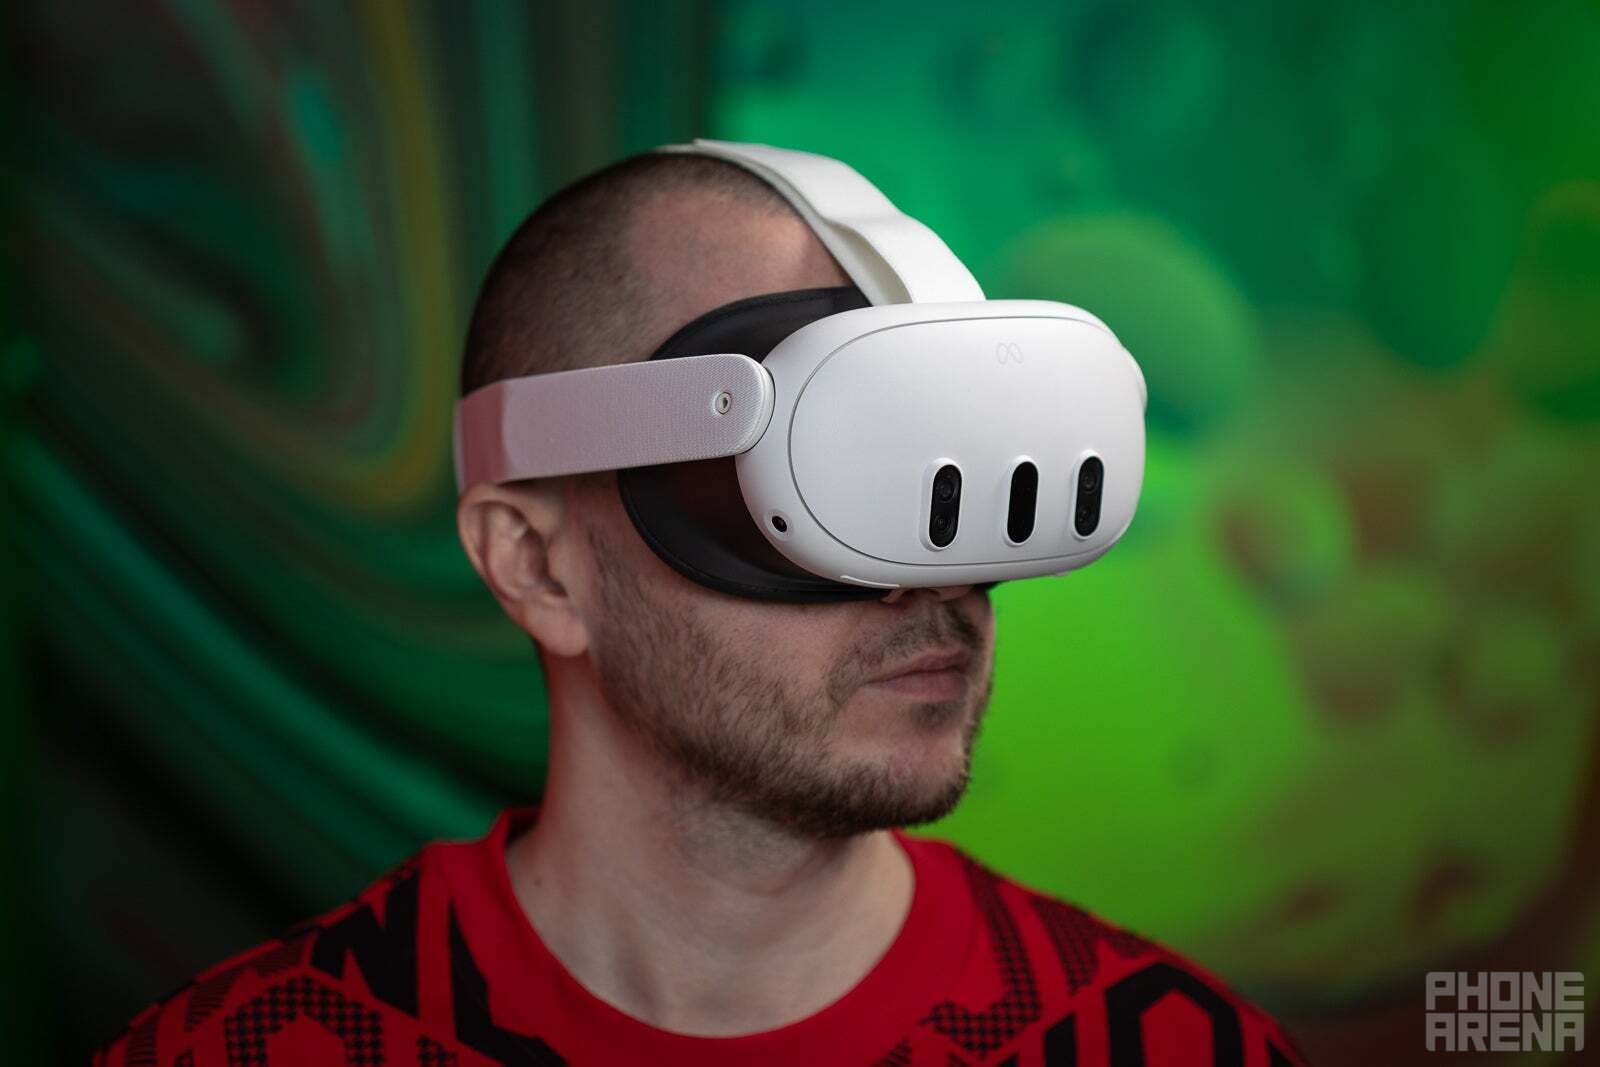 The popular Meta Quest 3 headset here is $499 (Image credit - PhoneArena) - Is Apple finally afraid of the competition? Unusual moves: folding MacBooks, iPhones, AR/VR headset, PC-like iPad